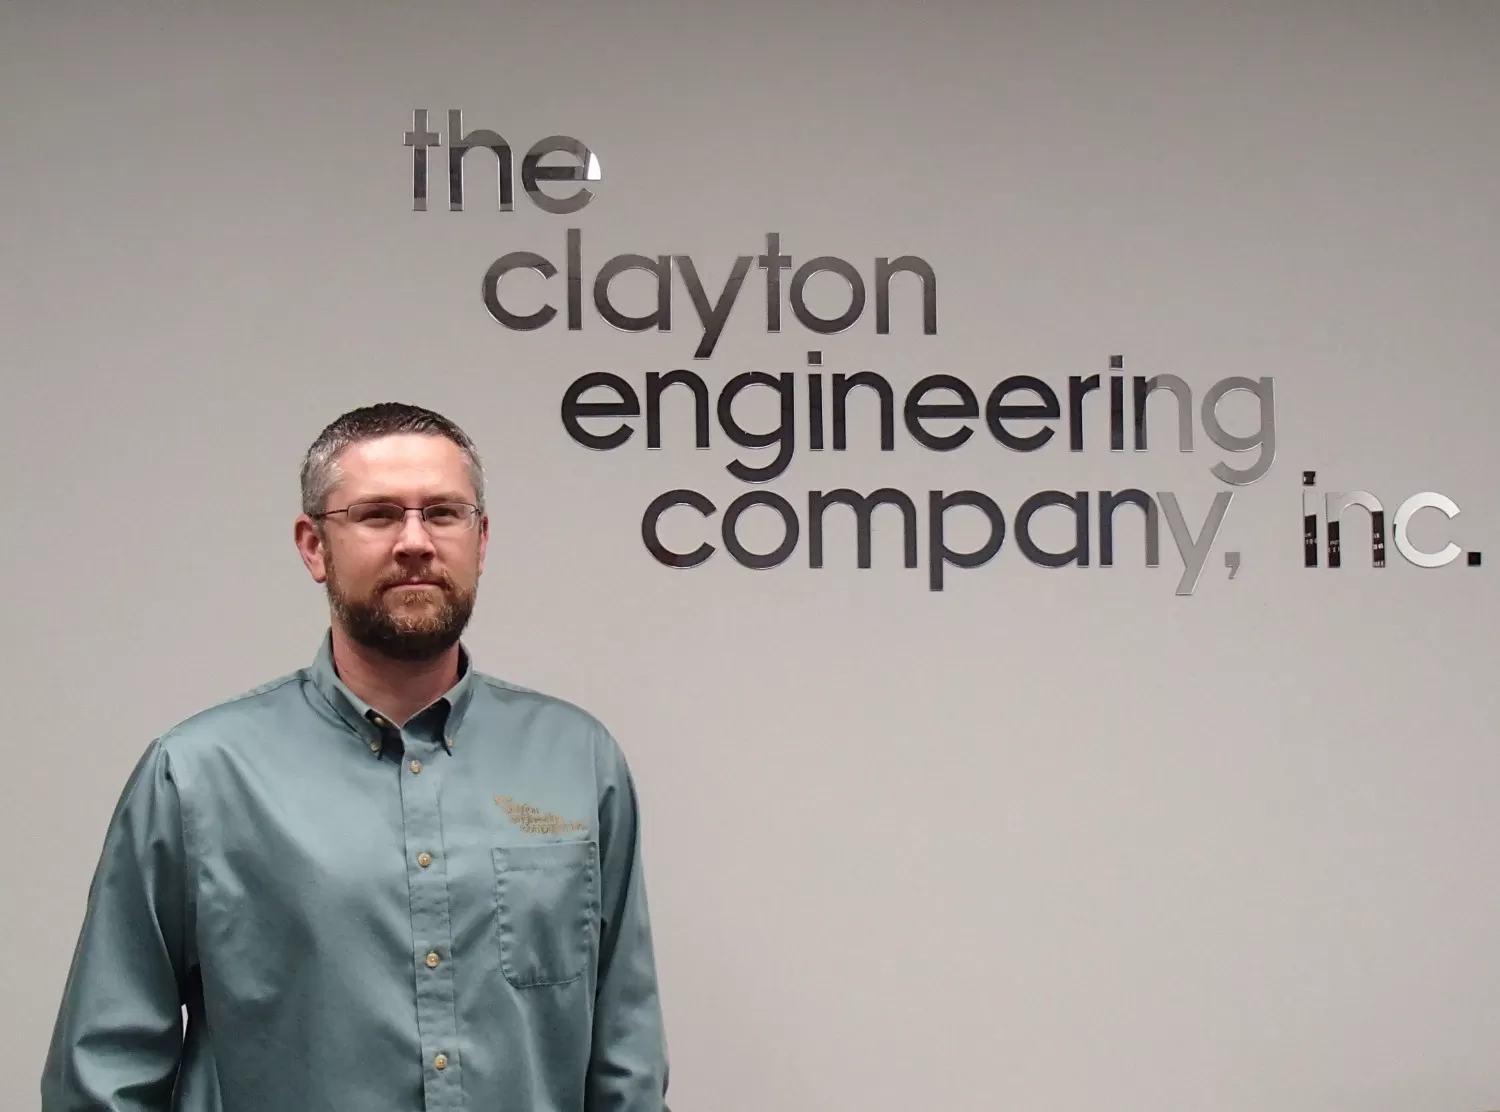 Contact - The Clayton Engineering Company